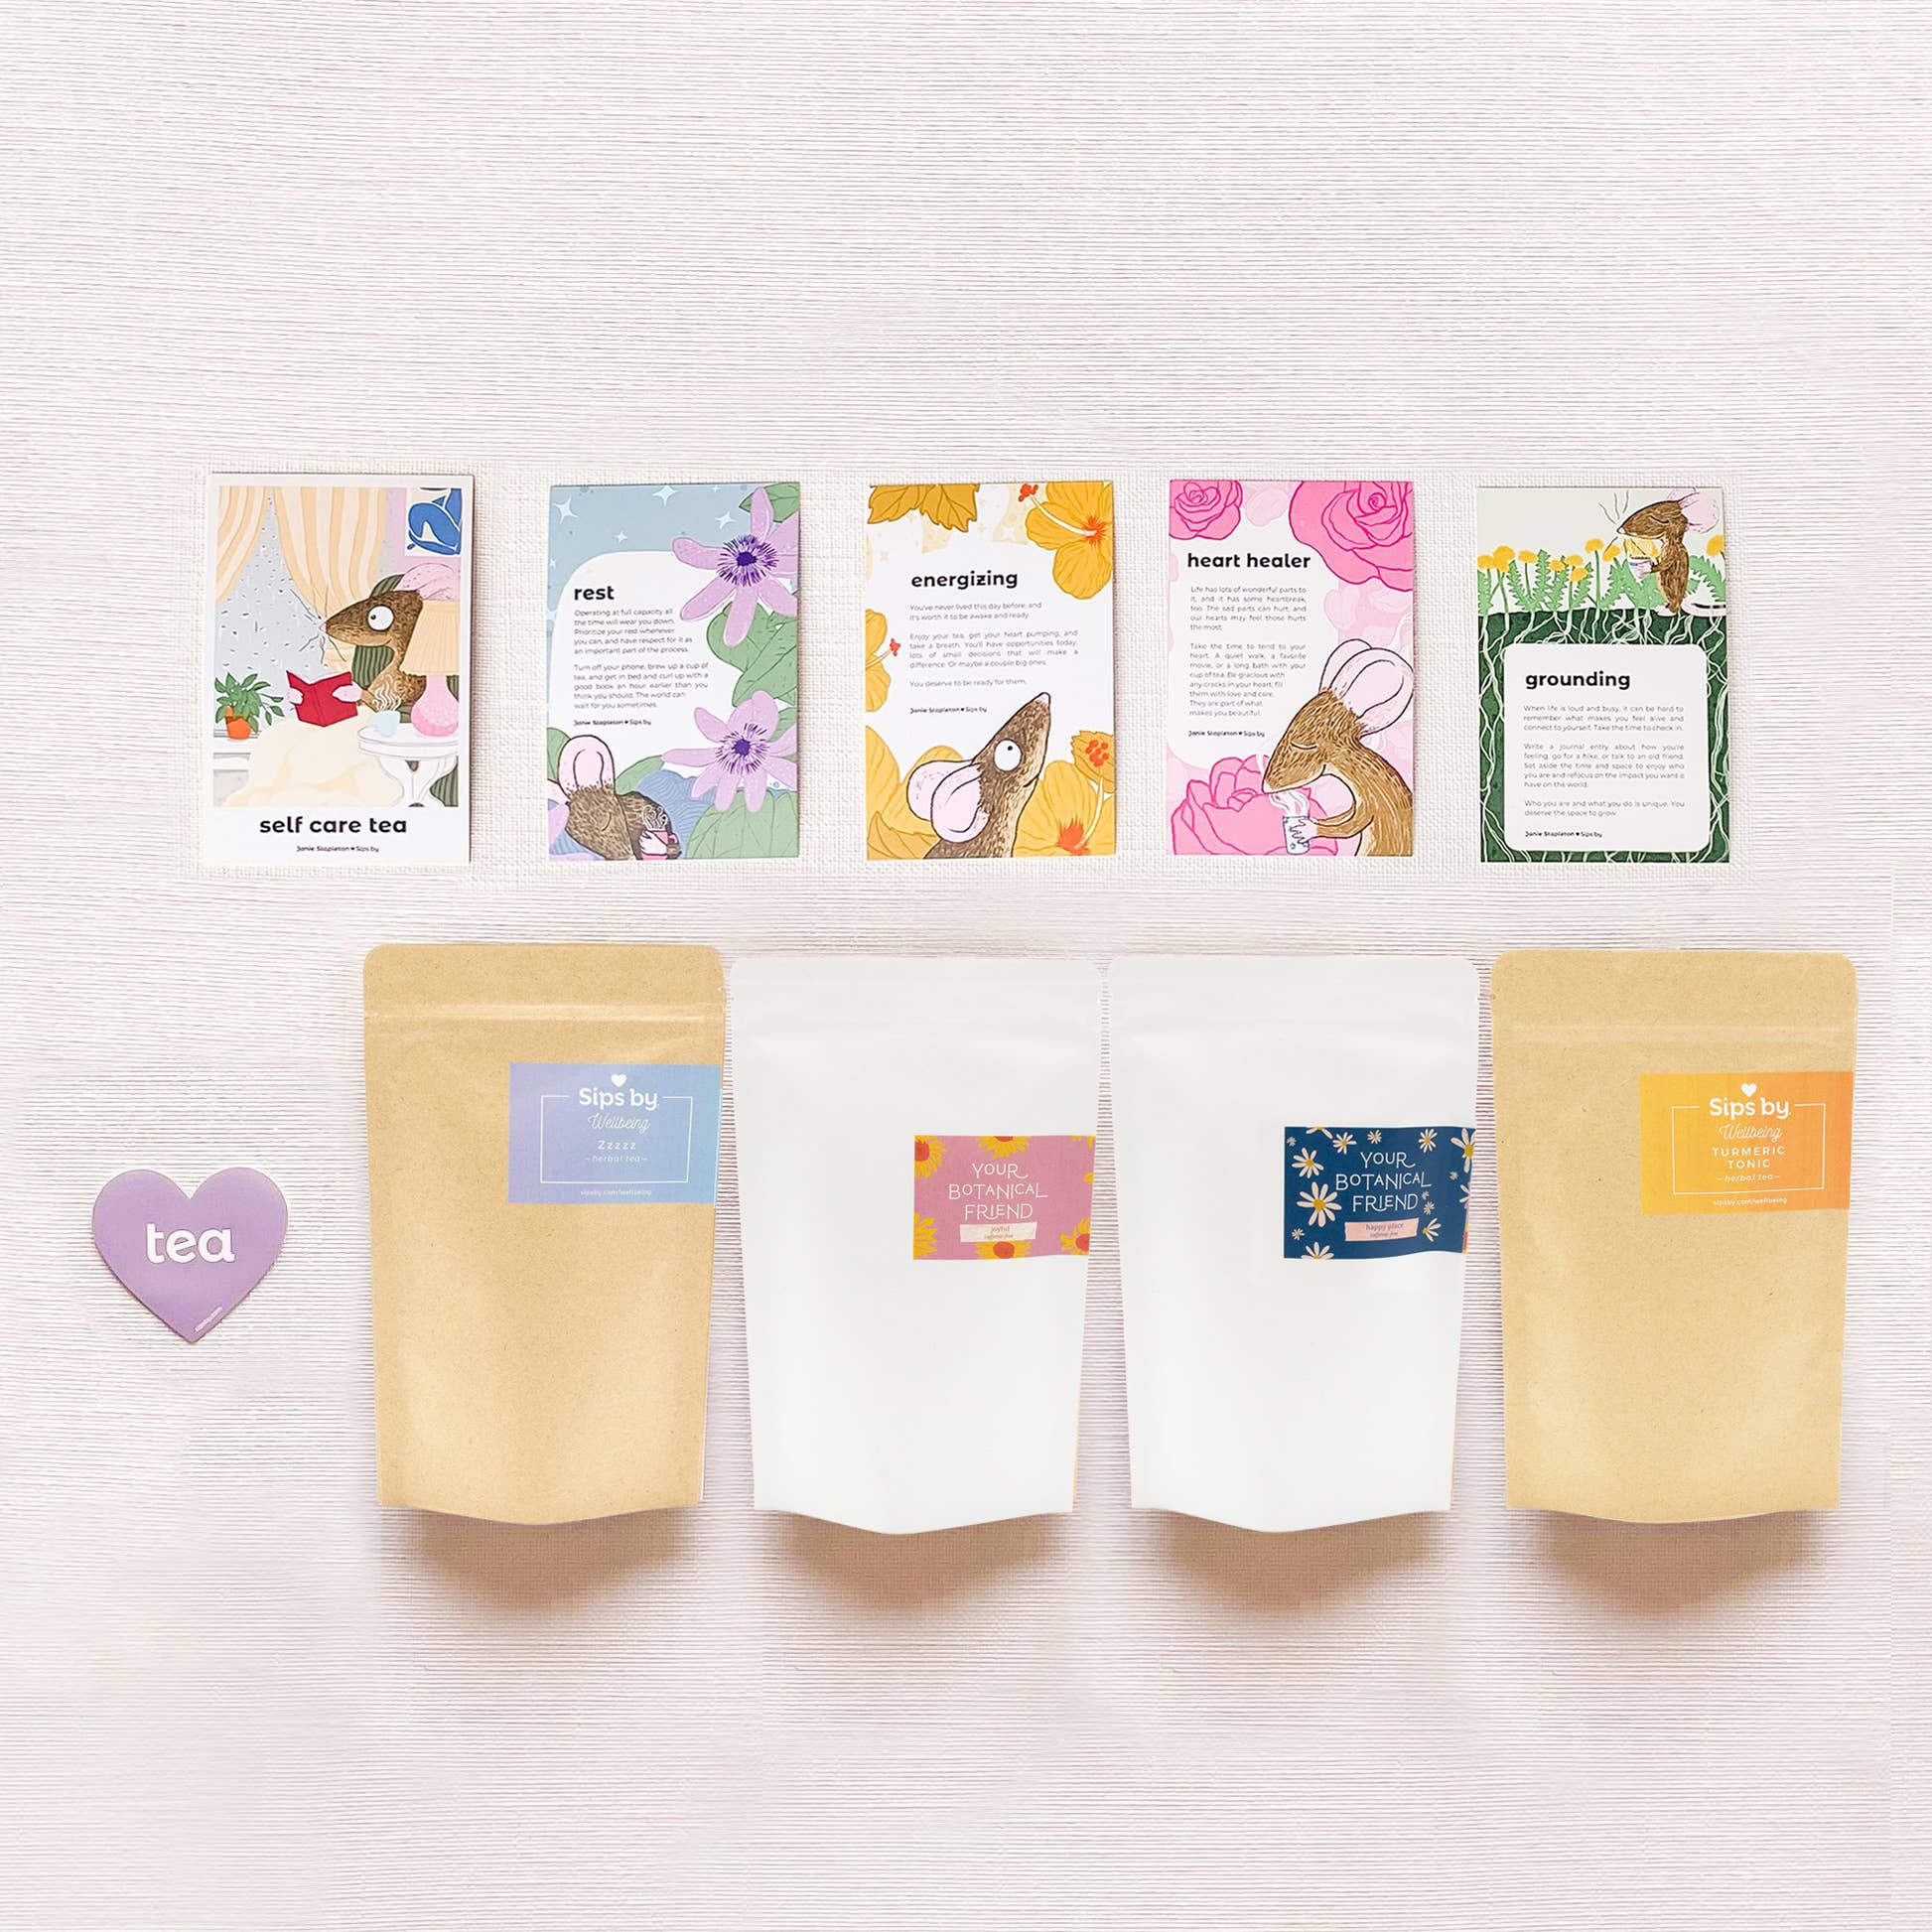 Self Care Tea Collection full-sized tea pouches with illustrated postcards by theme